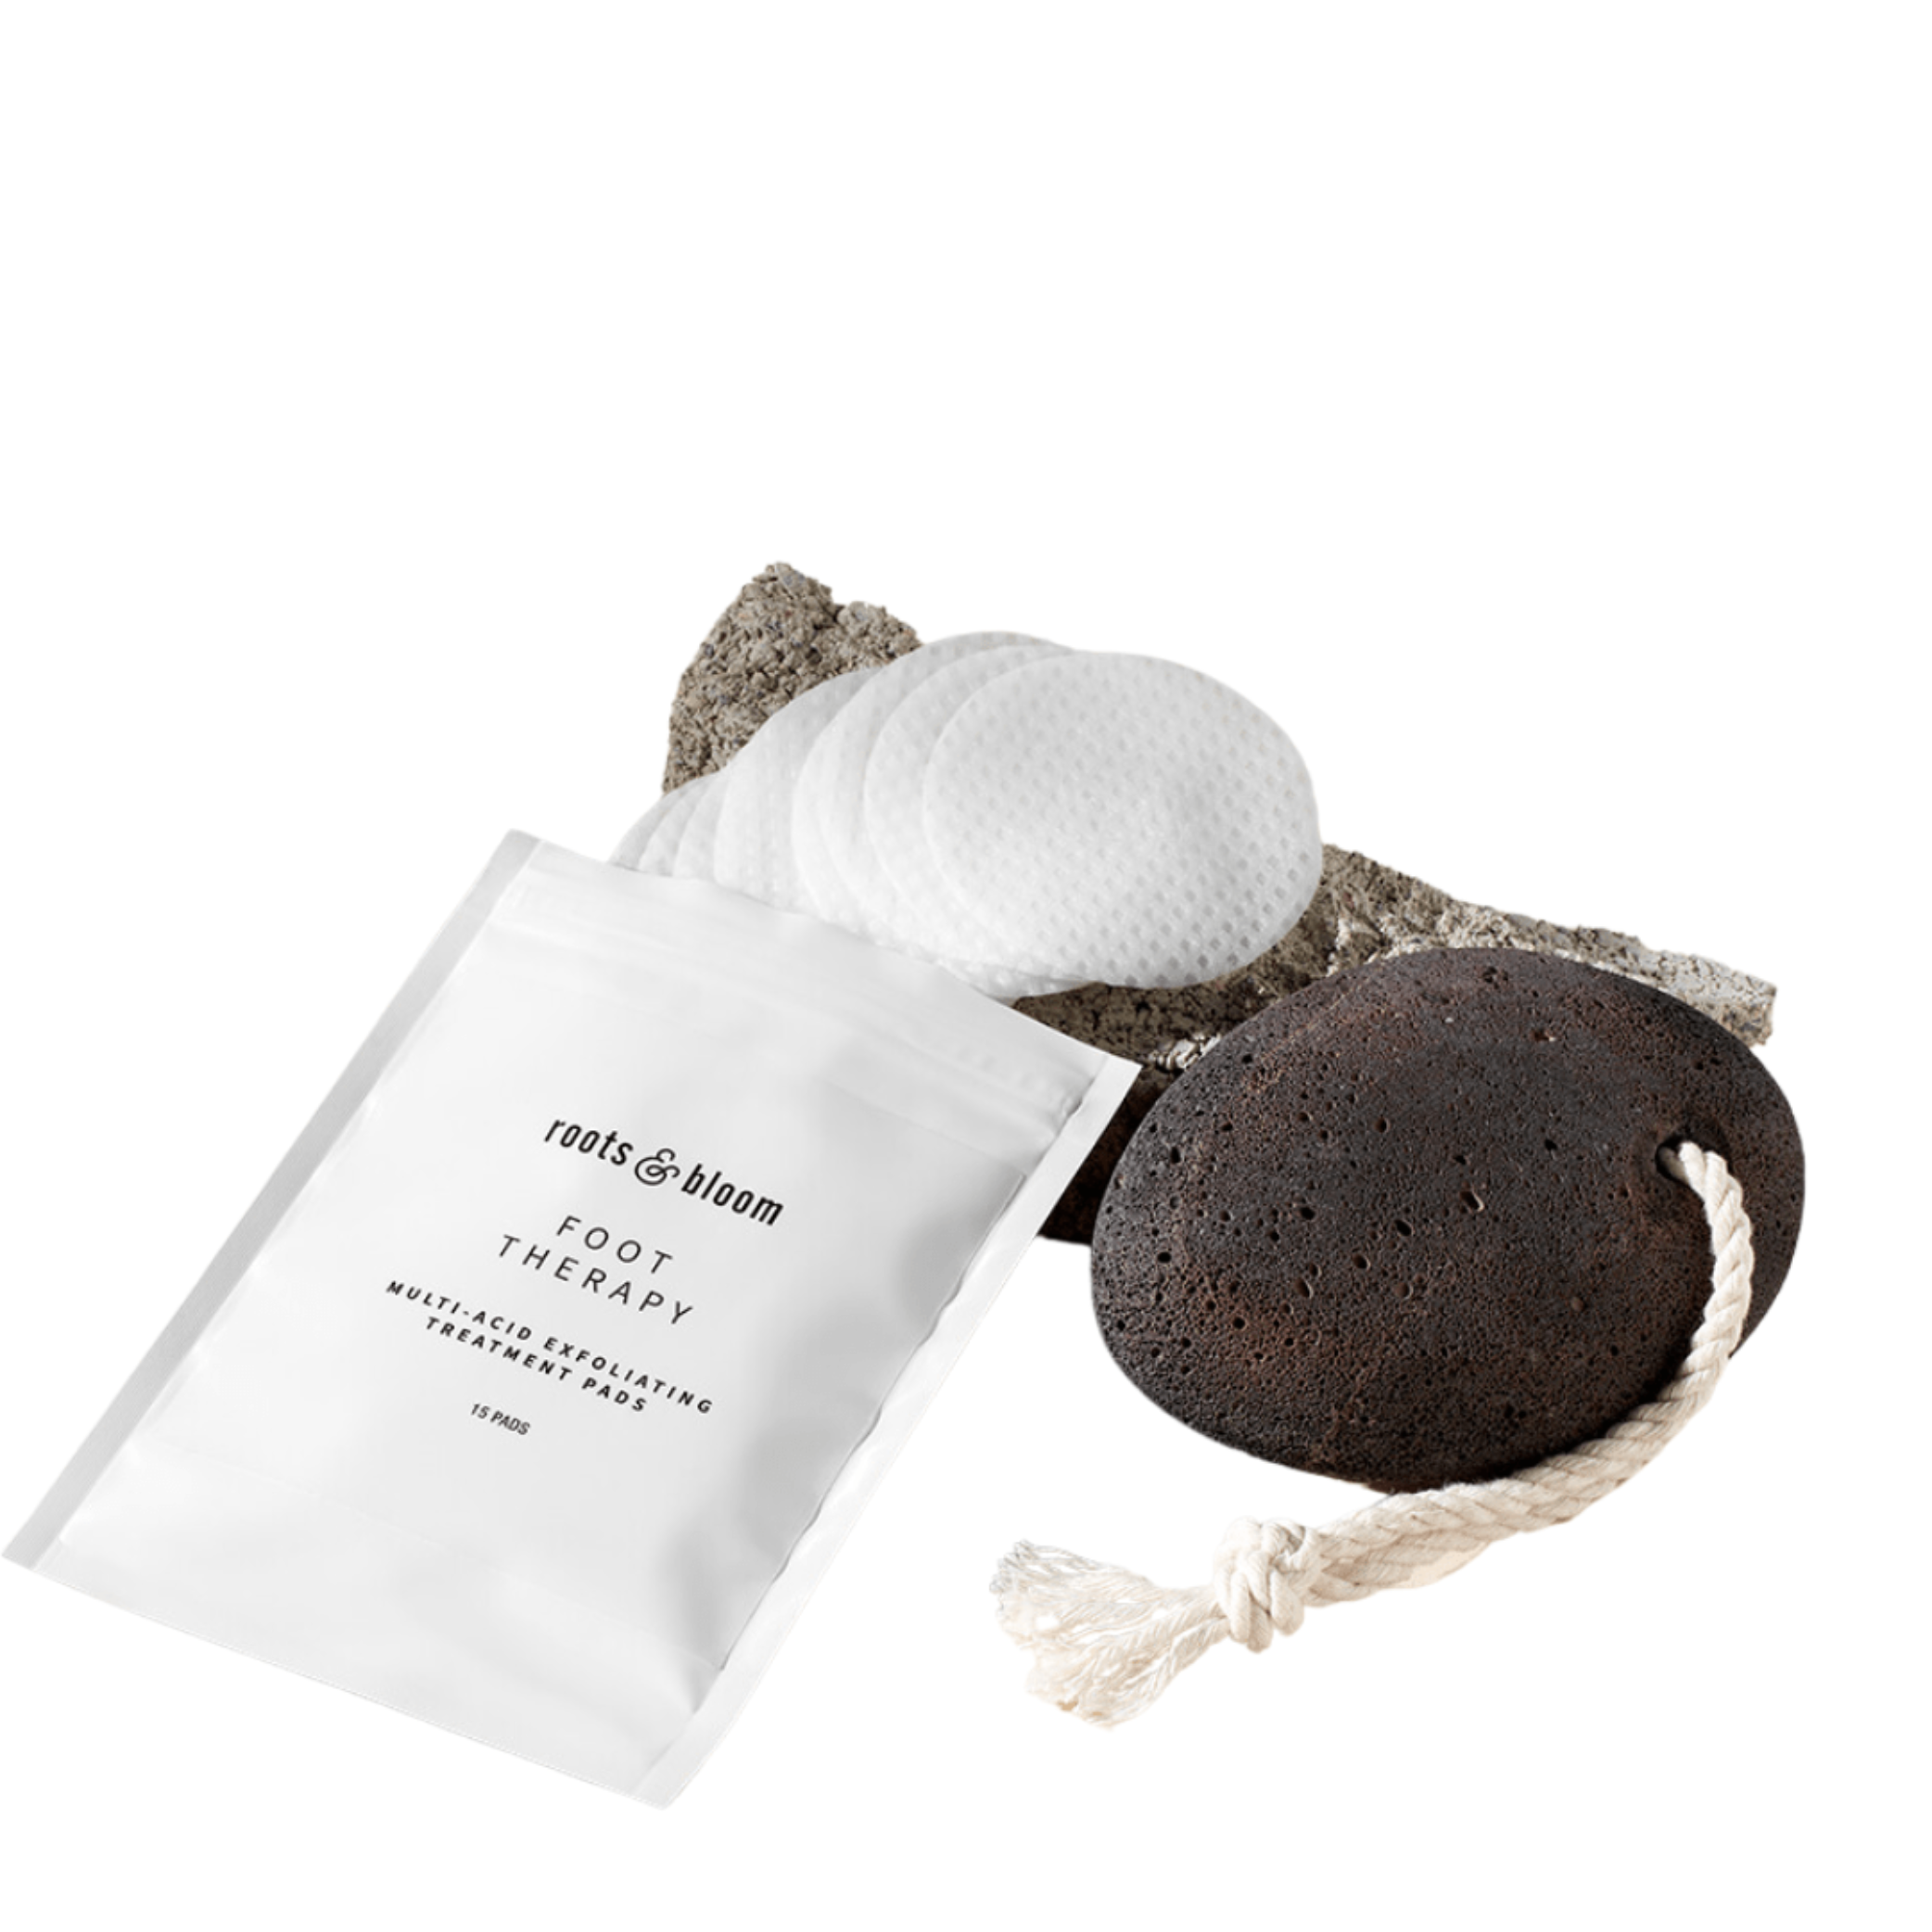 Exfoliating Treatment Pads with pumice stone